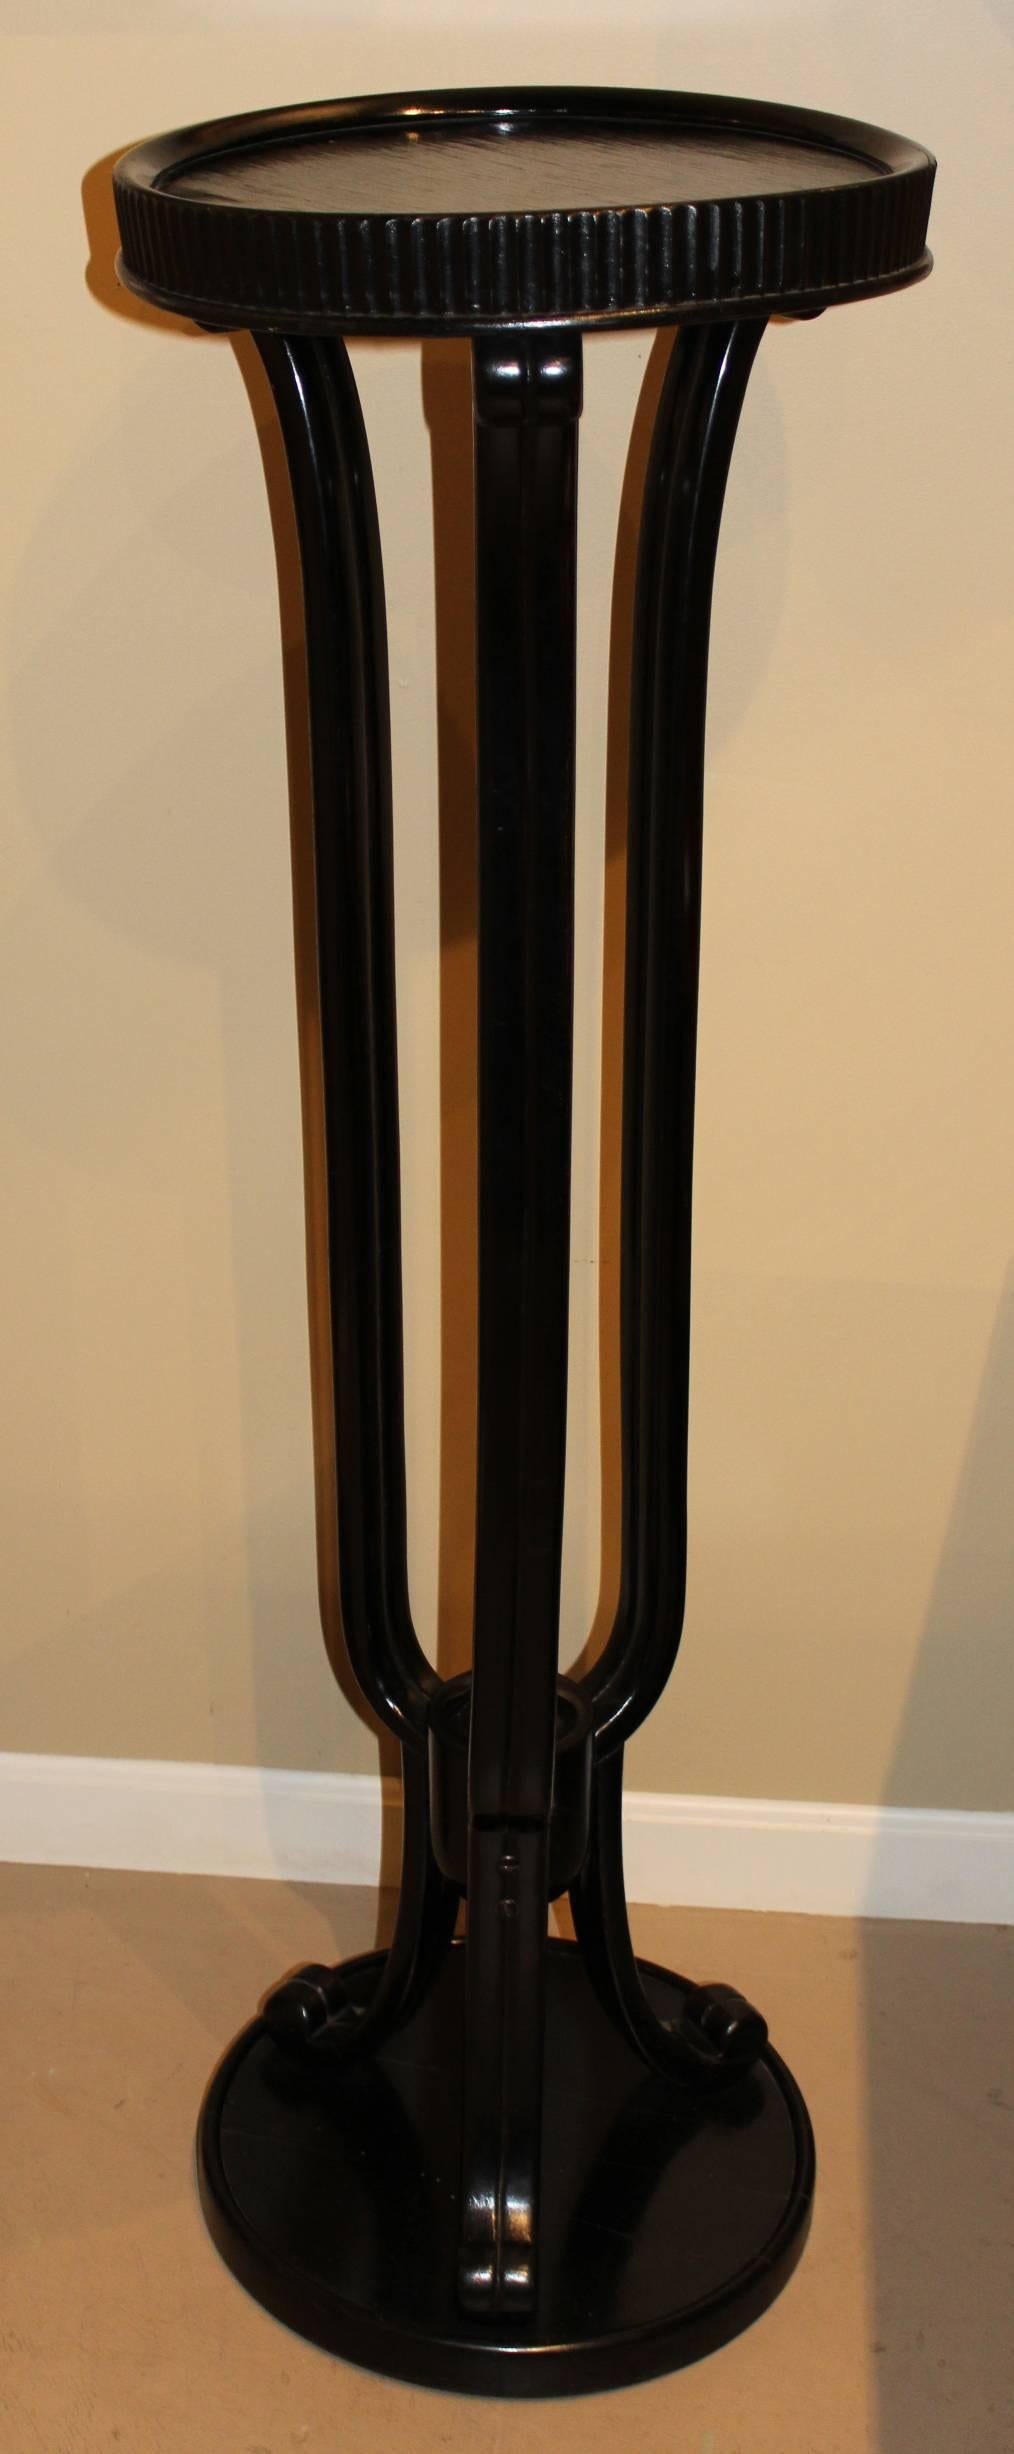 A tall ebonized wooden pedestal, probably beechwood, with great form, designed by Otto Prutscher (1880-1949) for Thonet, circa 1910. Elegant scrollwork with three long, slender support legs between a round top and base. This stand design was